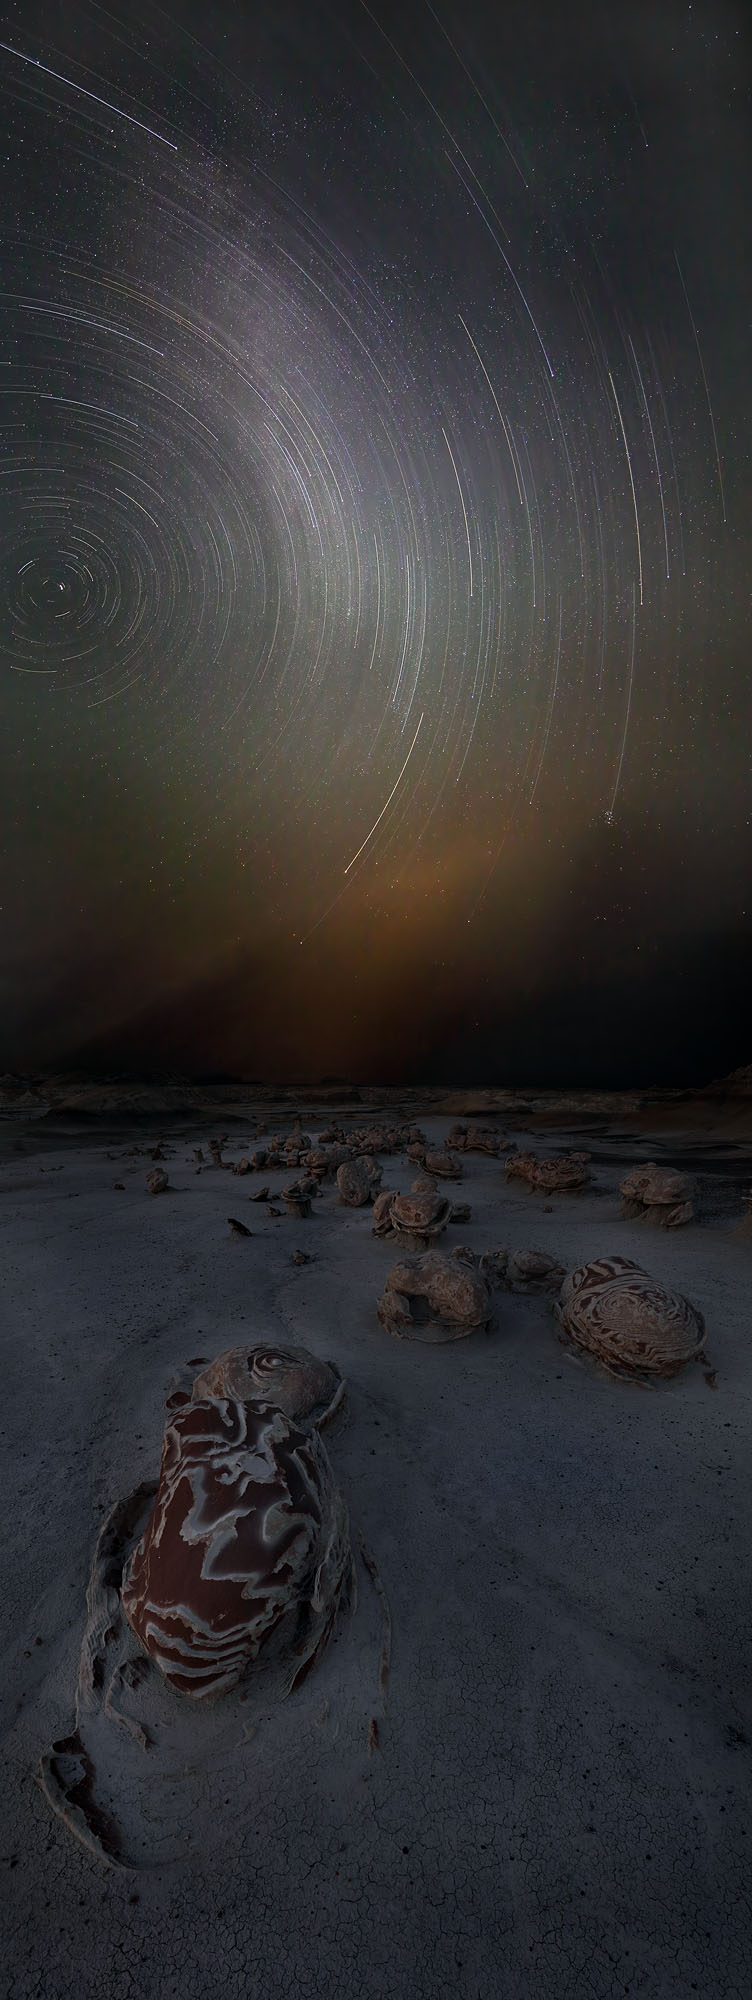 The Cracked Eggs of the Bisti Wilderness De-Na-Zin in New Mexico under the stars of the Milky Way.